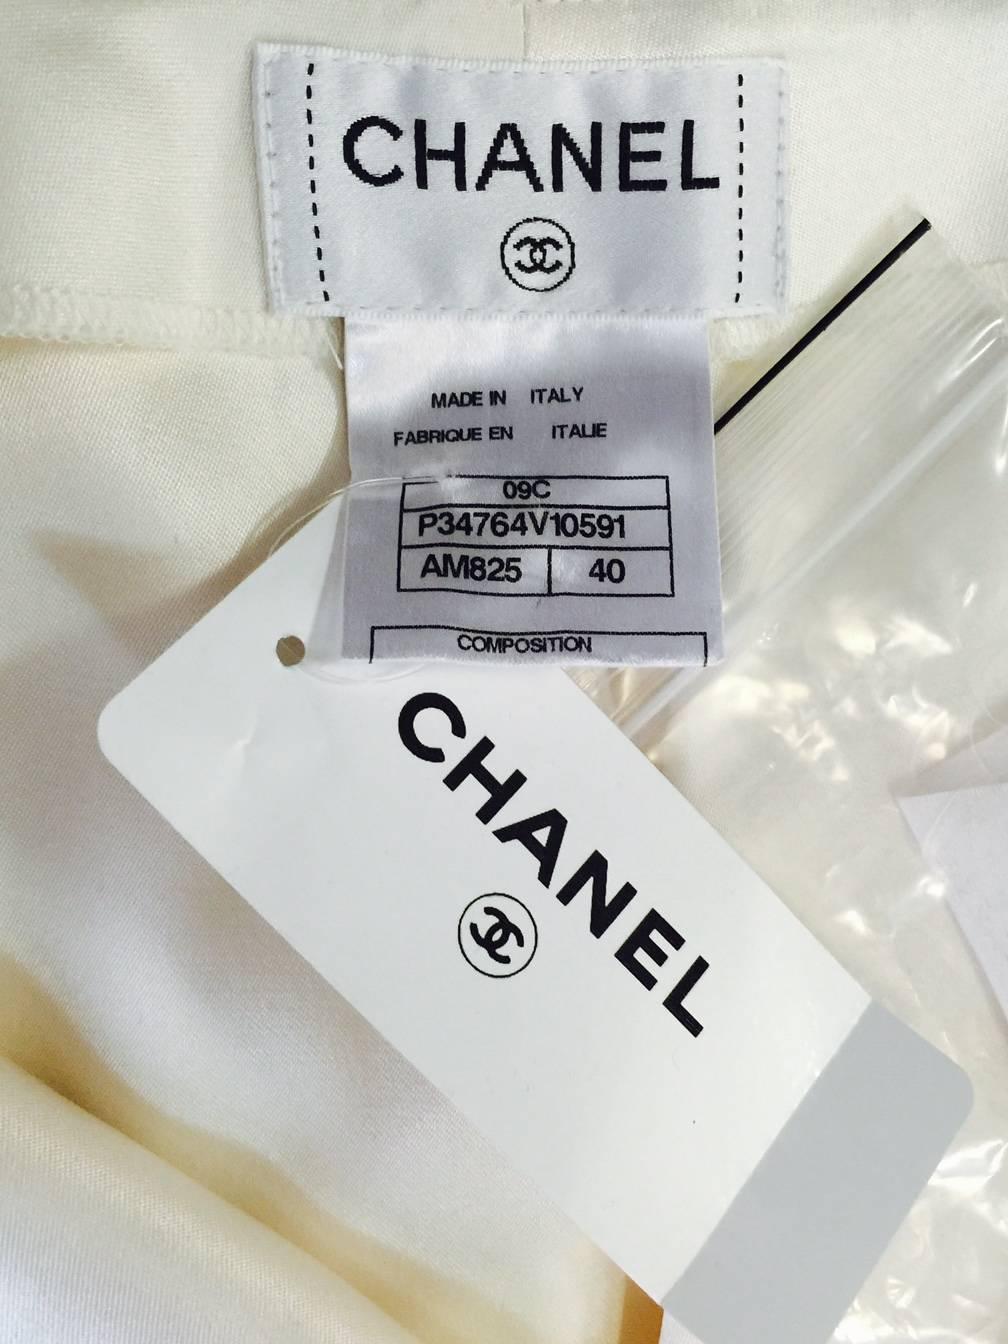 Chanel Cruise 2009 Cruise Collection Ivory Silk Mariner's Pant With Black Trim  In Excellent Condition For Sale In Palm Beach, FL